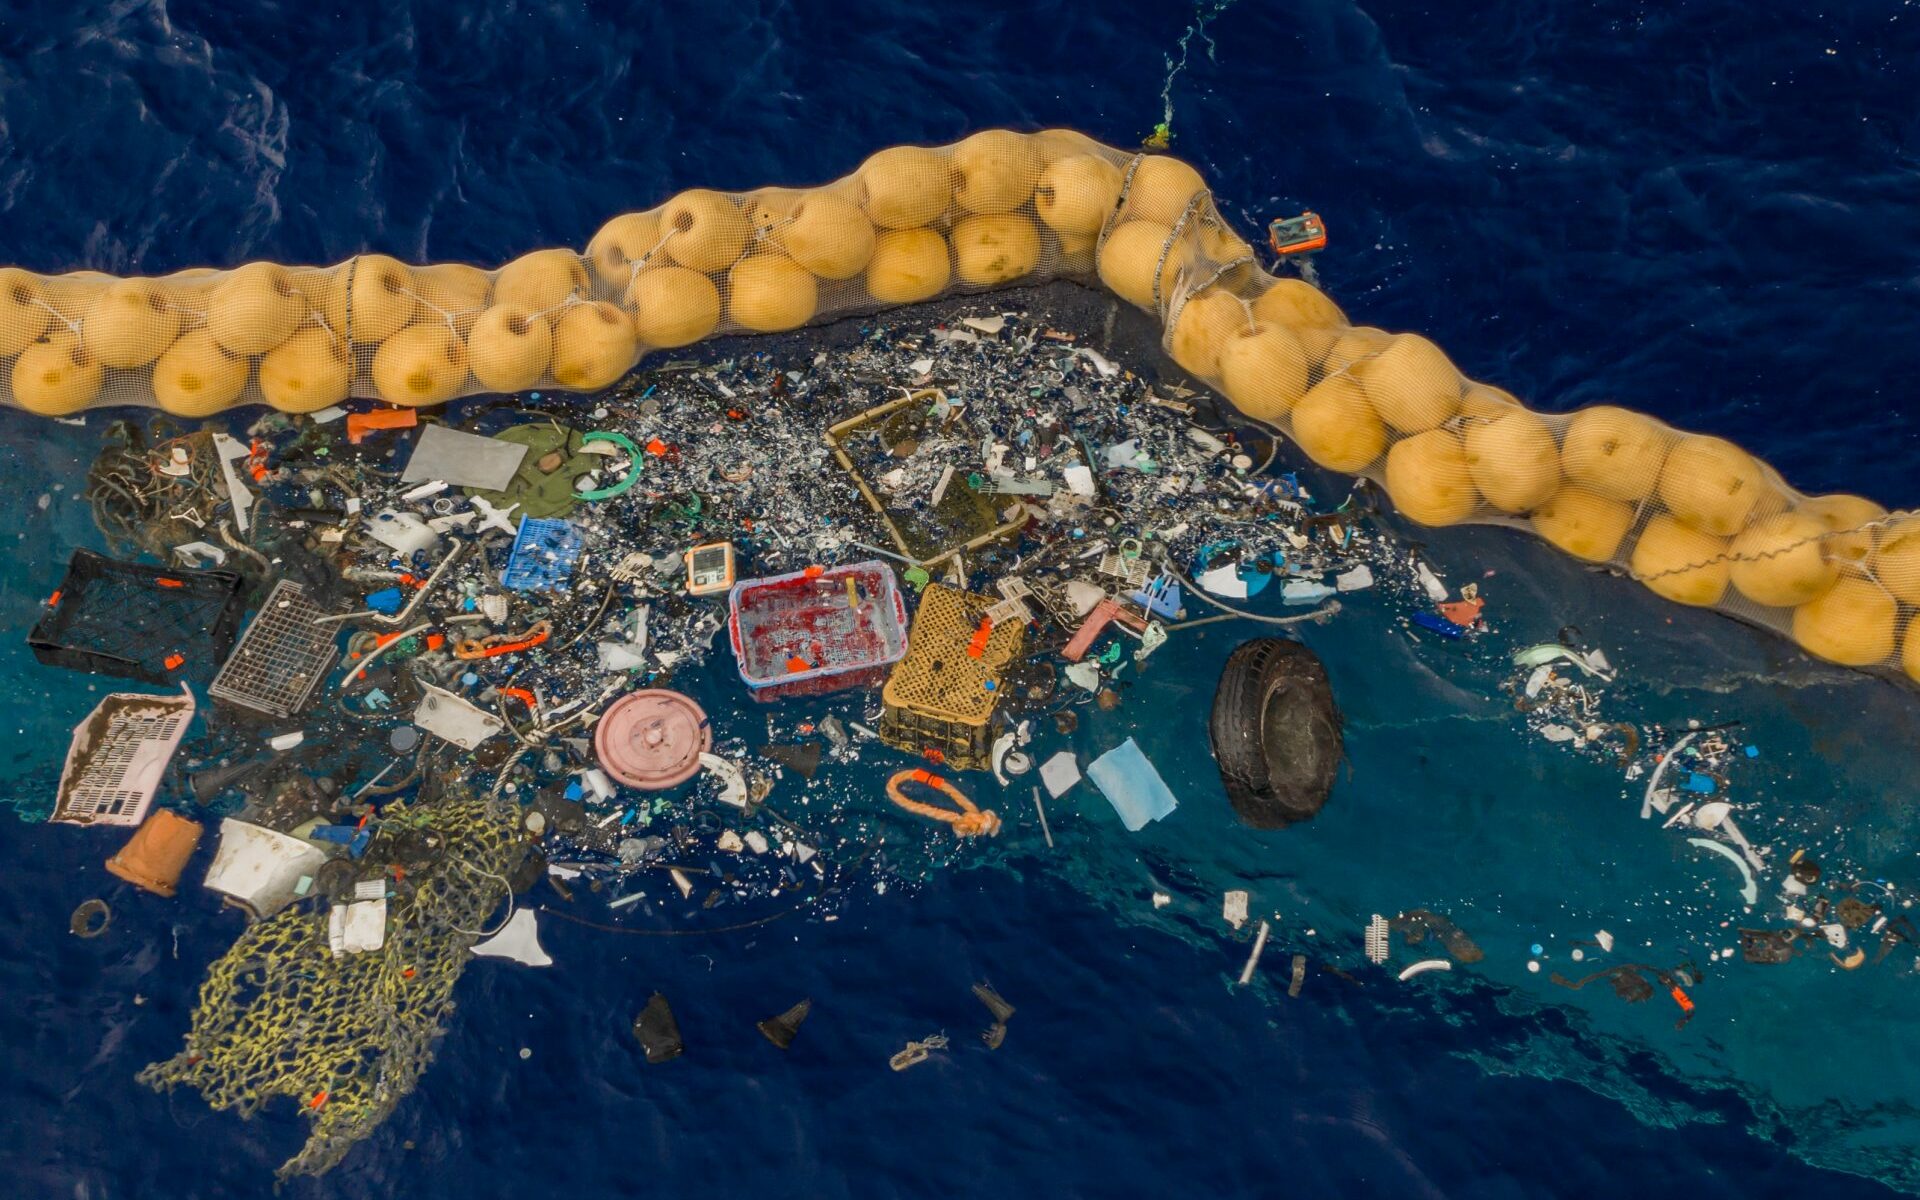 Image via The Ocean Cleanup. The project cleaned up plastic as well as a wheel.